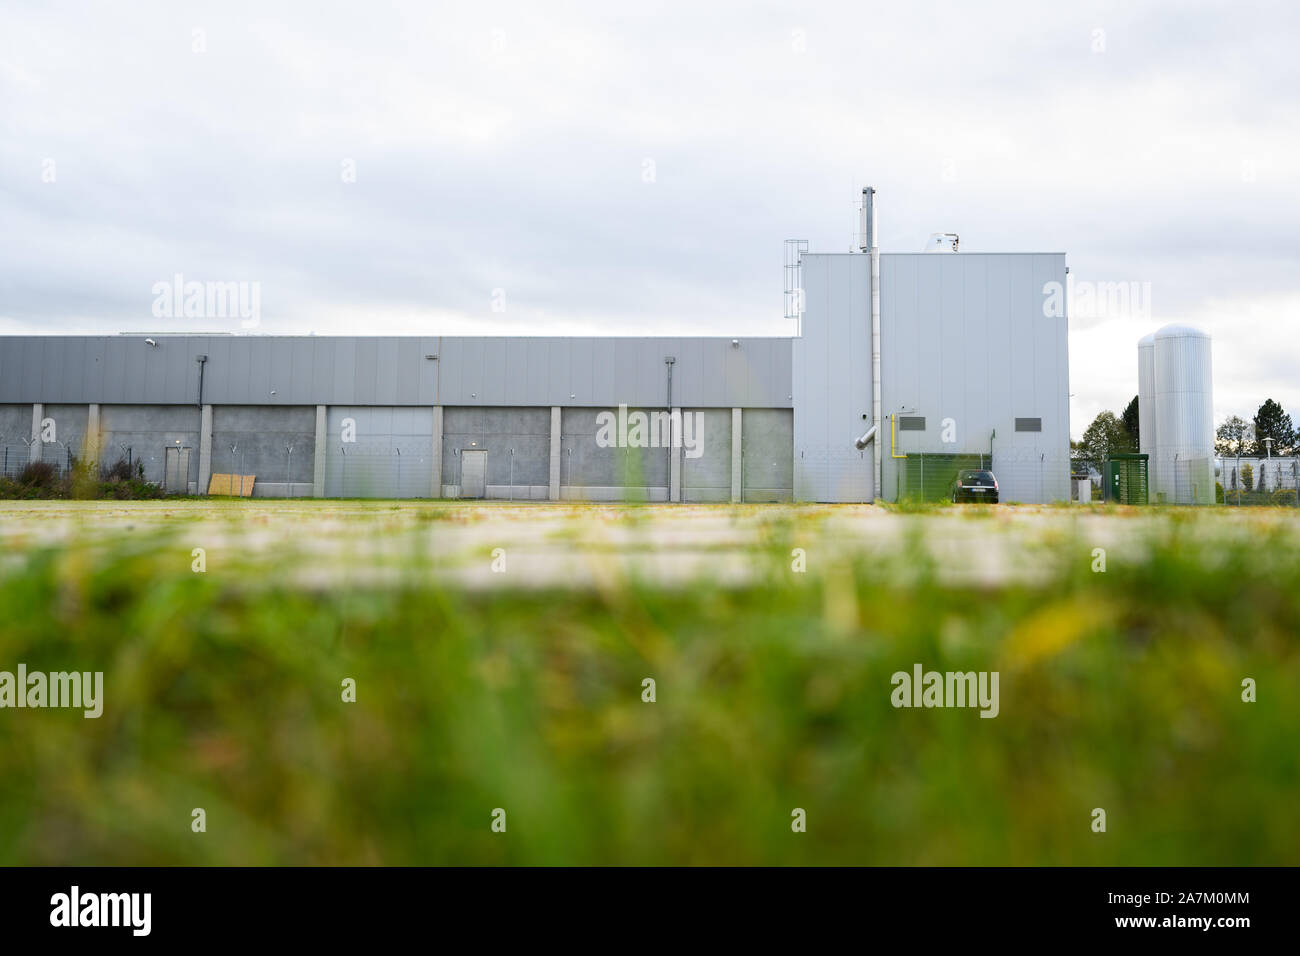 Goldenstedt, Germany. 03rd Nov, 2019. A view of the premises of Fleisch- Krone-Feinkost GmbH. After the discovery of a suspicion of listeria in  ready-made meatballs, production at the affected plant in Goldenstedt in